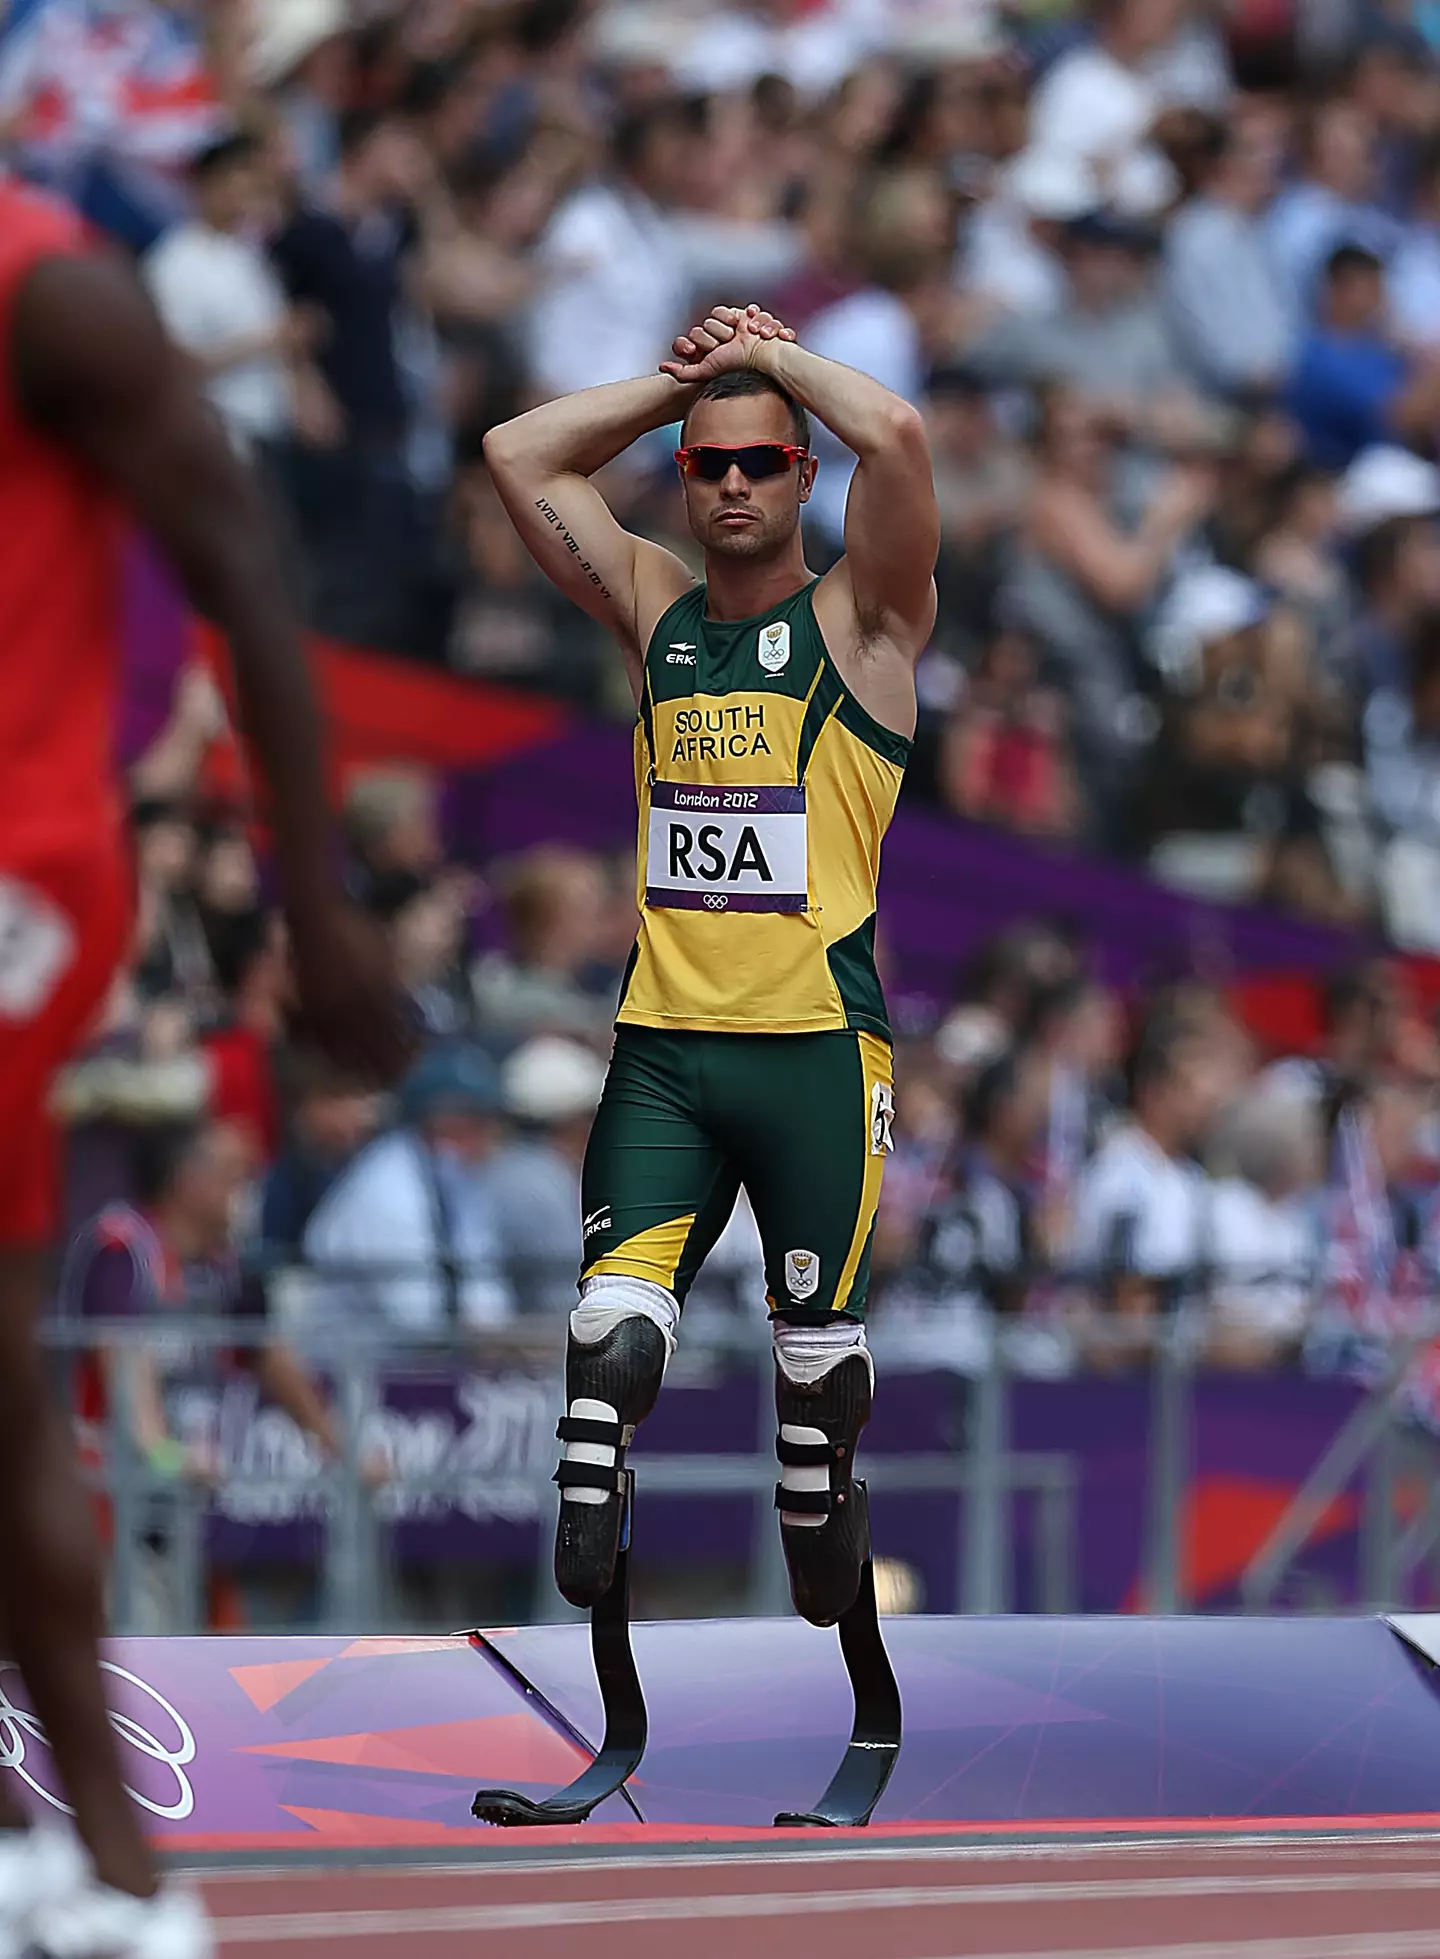 Paralympian Oscar Pistorius was at the height of his career when he killed Reeva Steenkamp.